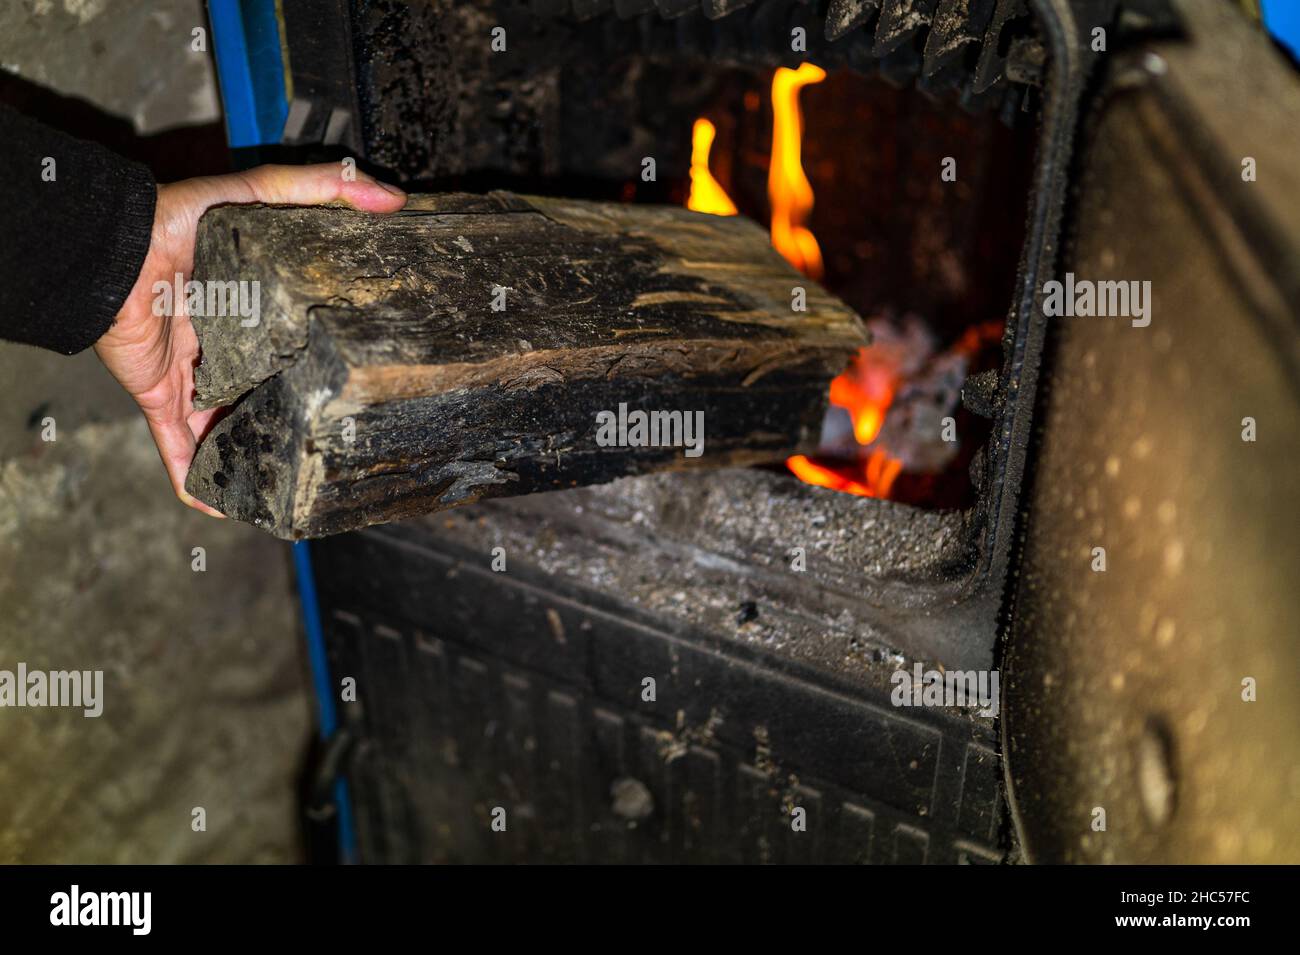 A piece of wood put into the fireplace by hand. Stock Photo